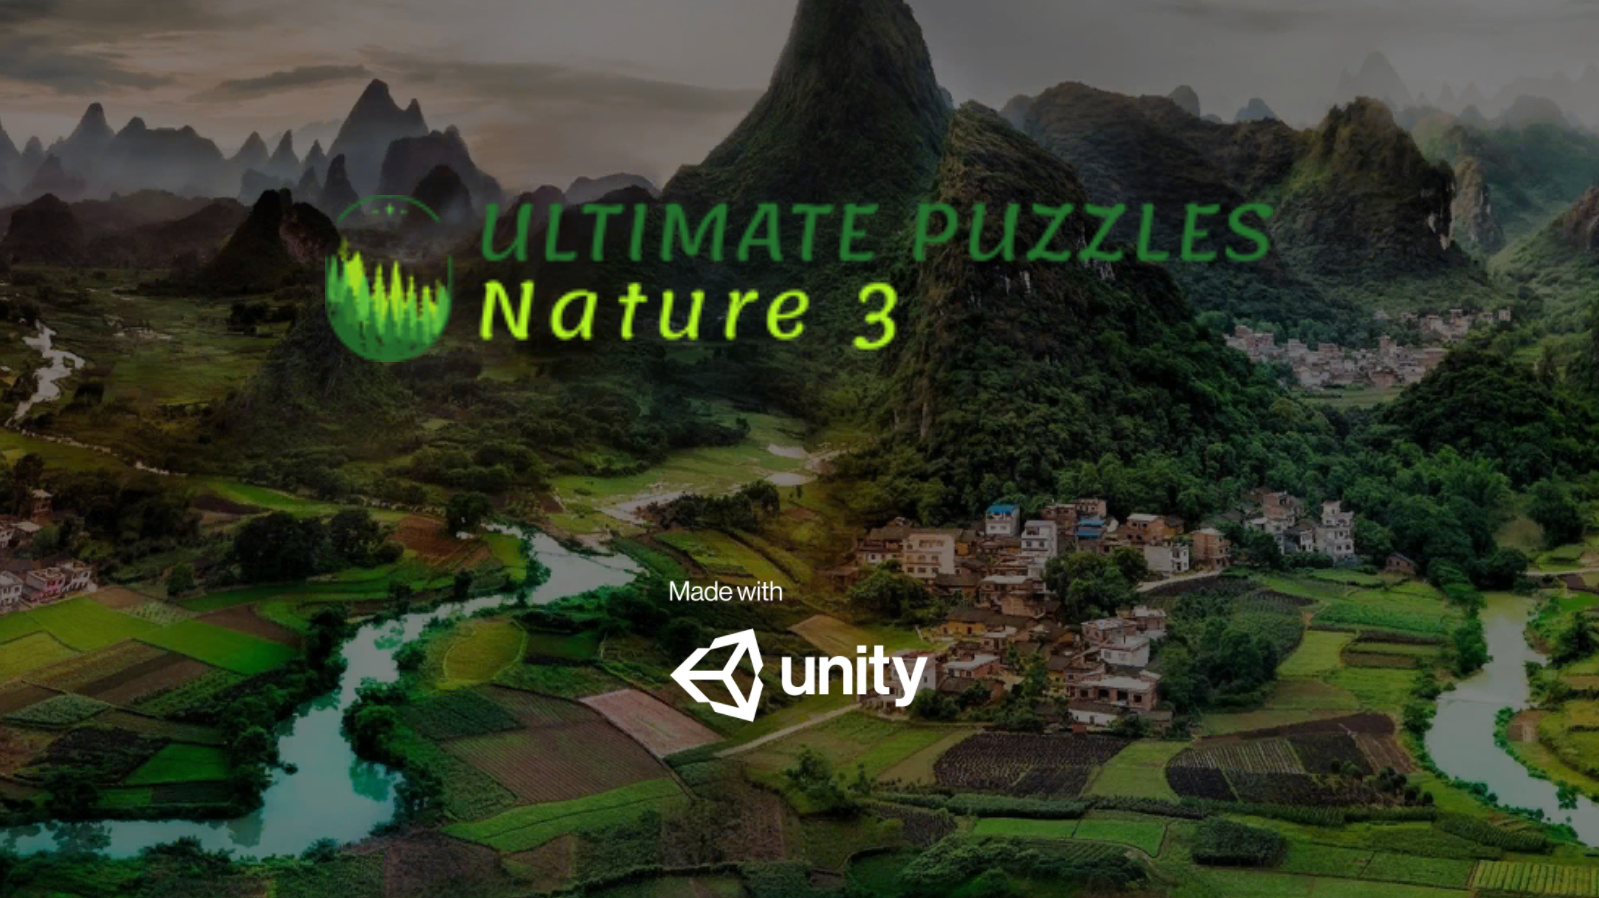 Ultimate Puzzles Nature 3 Giveaway